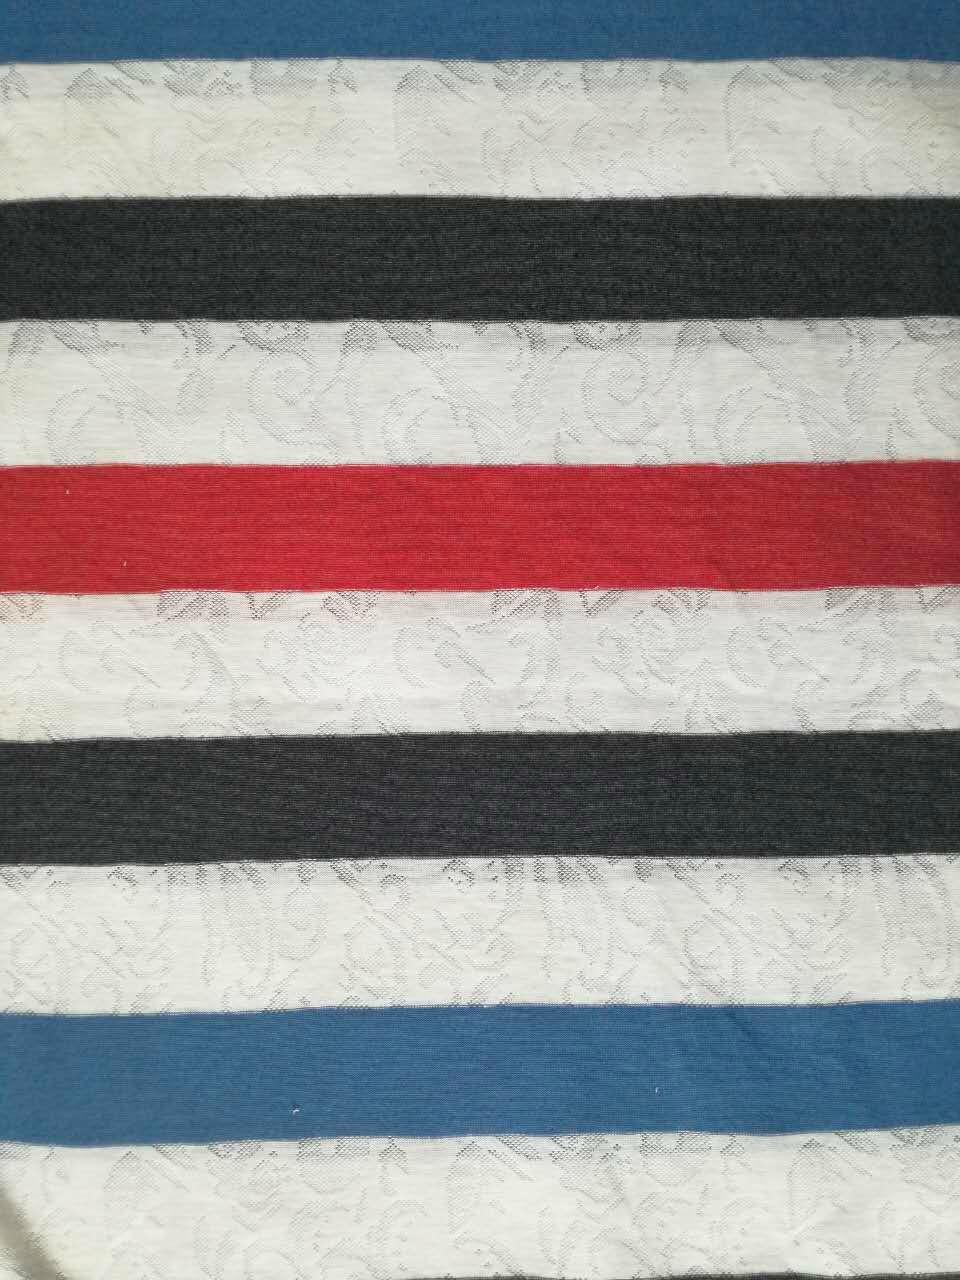 Strip Jacquard knitted weaving fabric